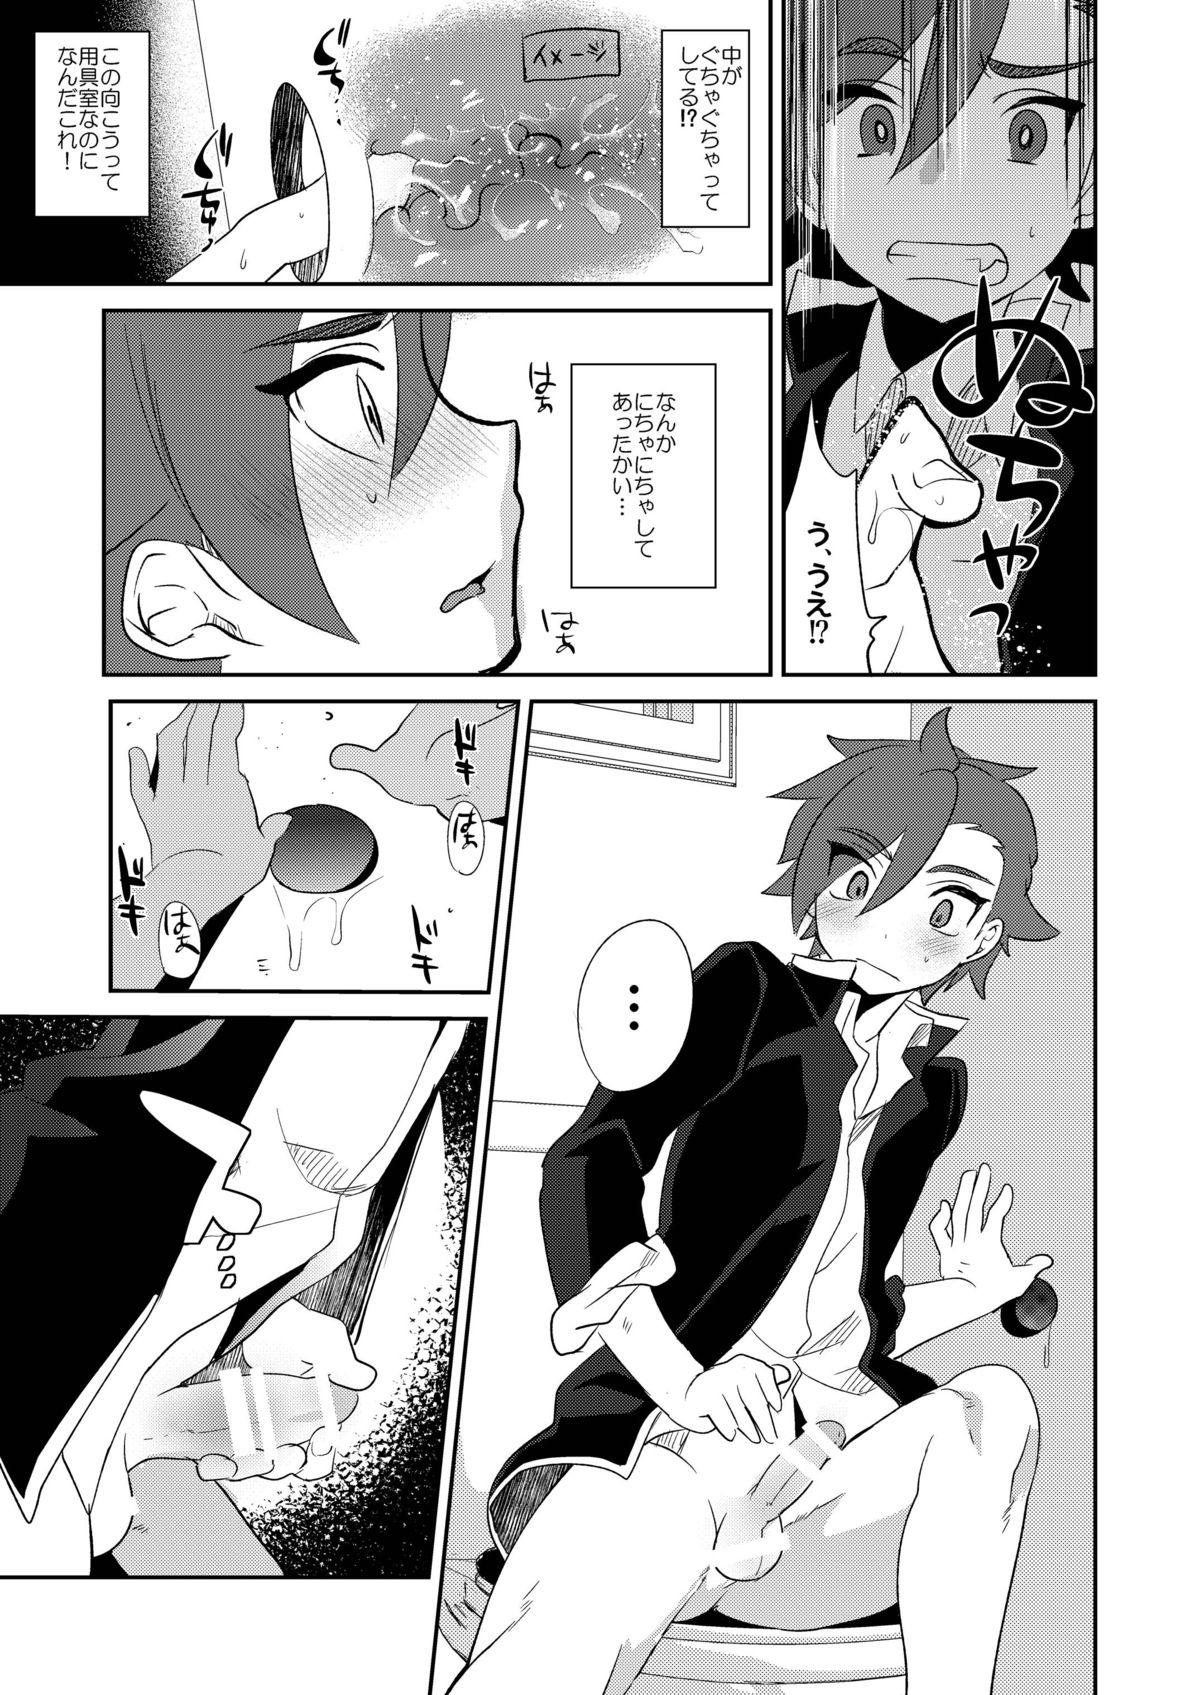 Lingerie Onasekai + Omake - Gundam build fighters try This - Page 7